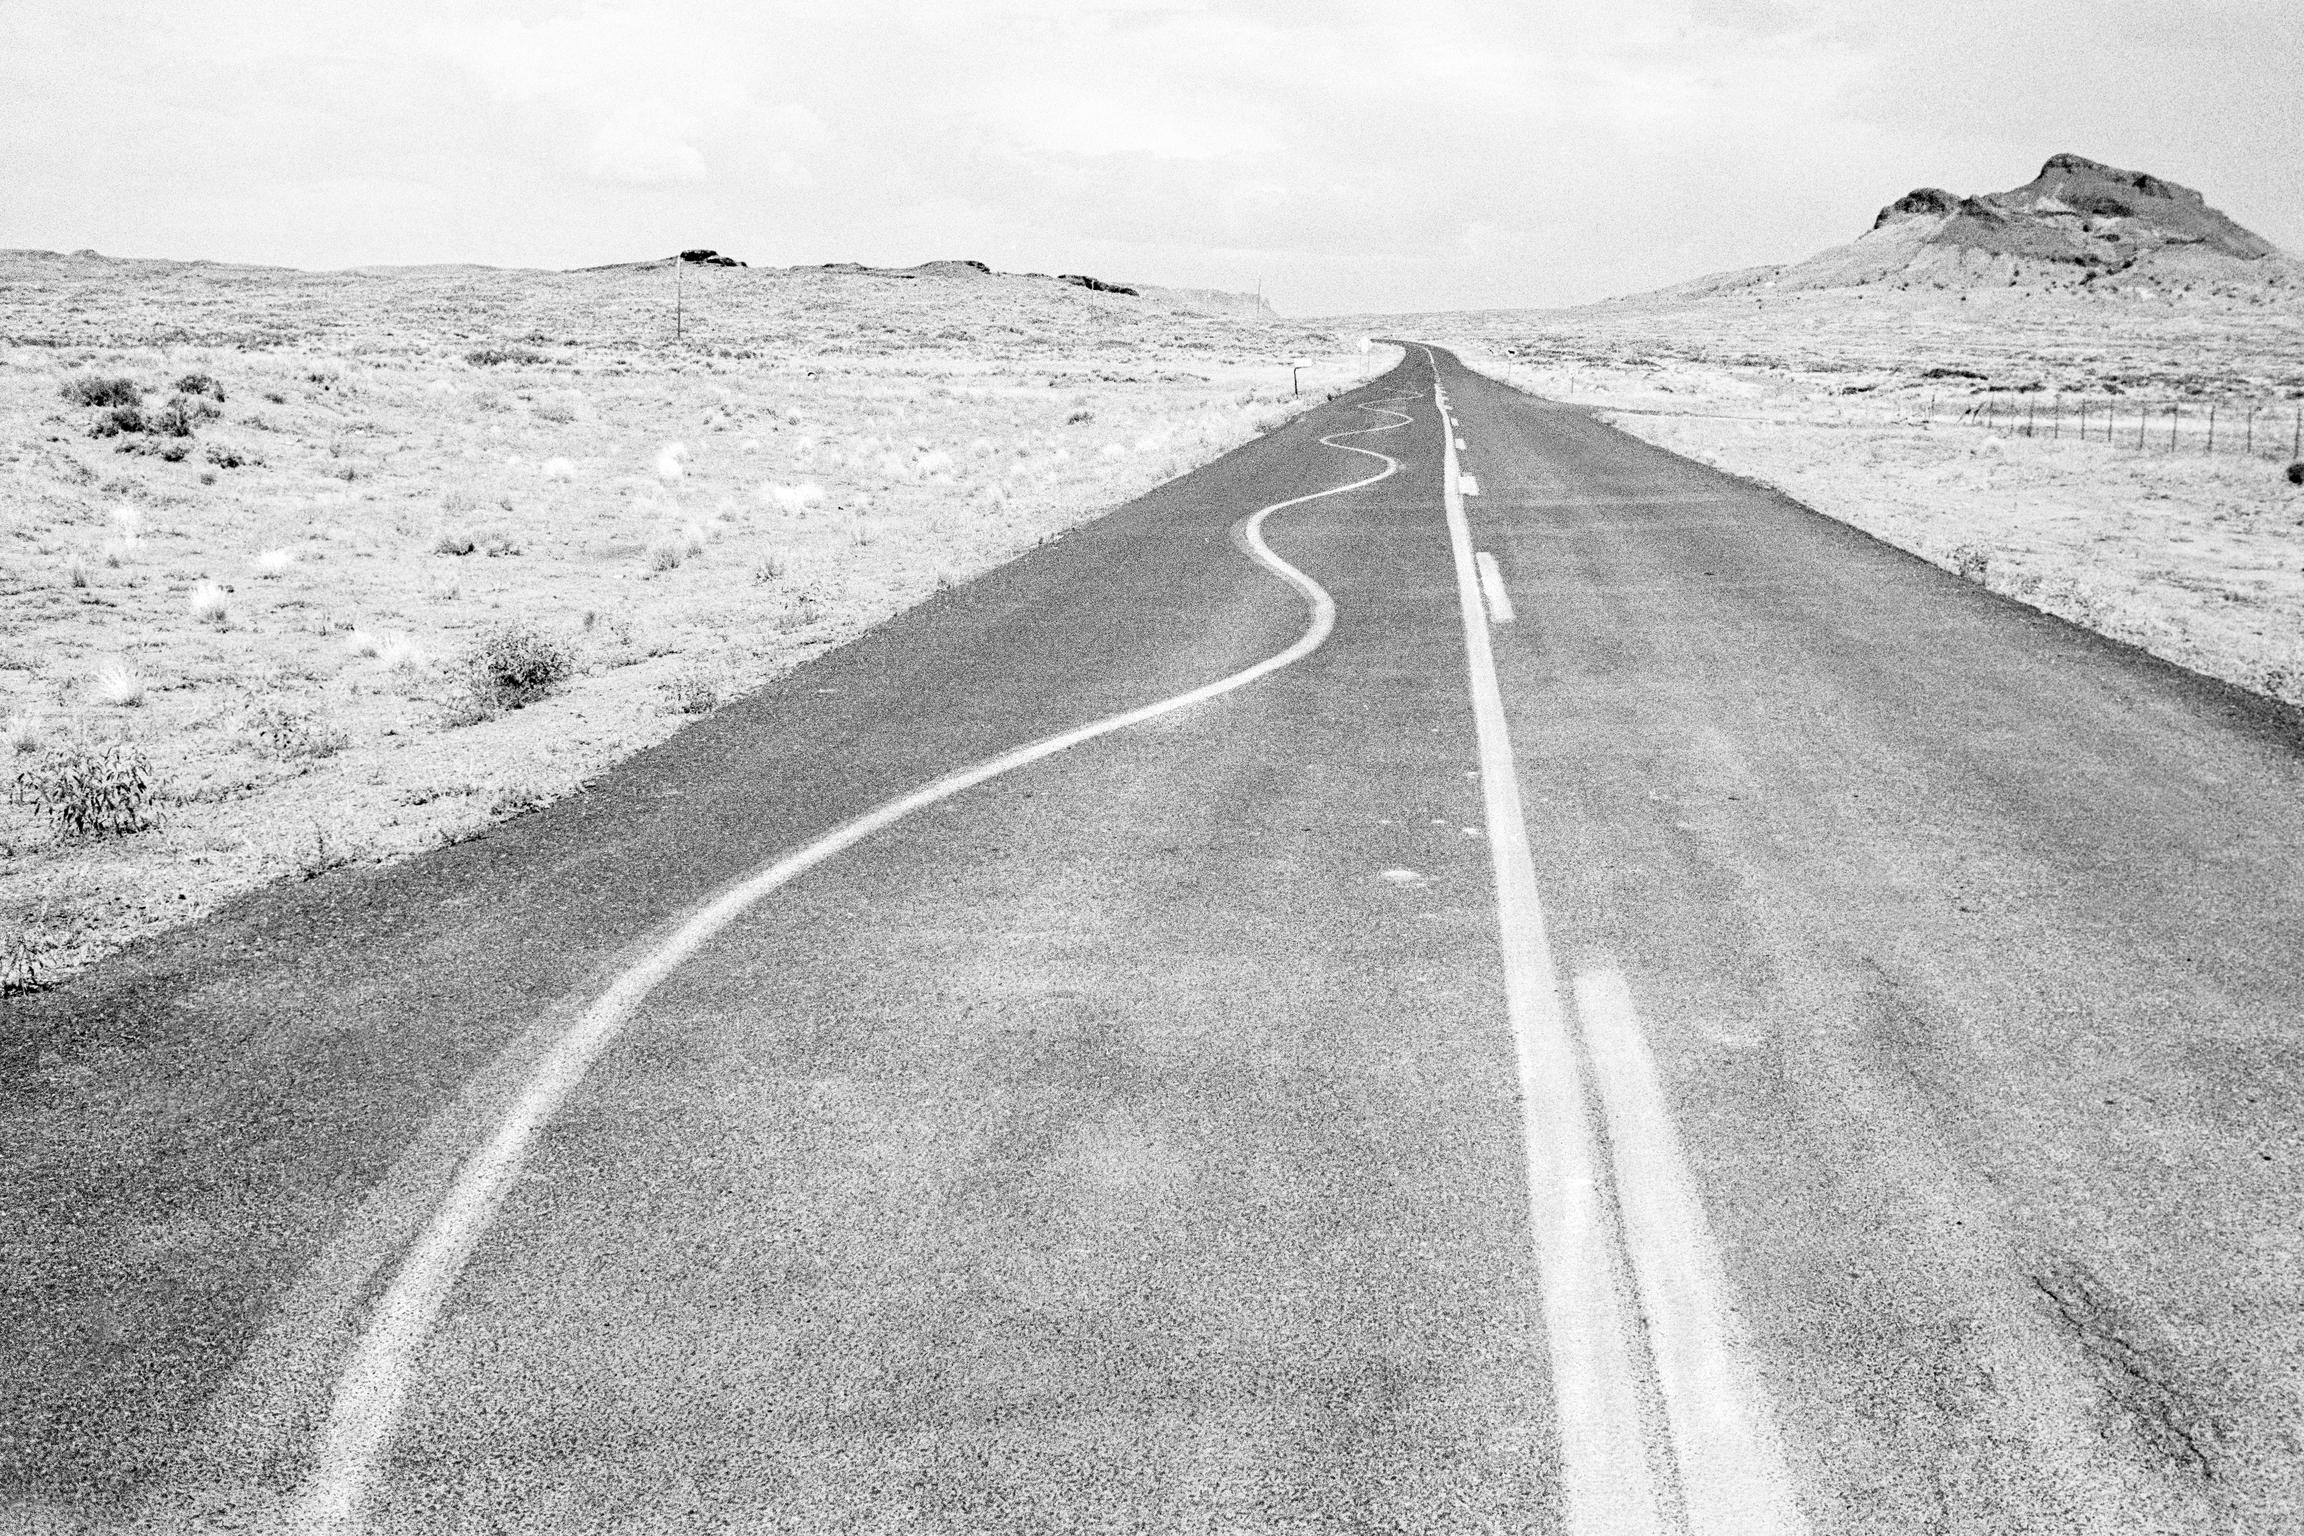 The main highway through the Painted Desert seems to have rather surreal road markings. Arizona USA